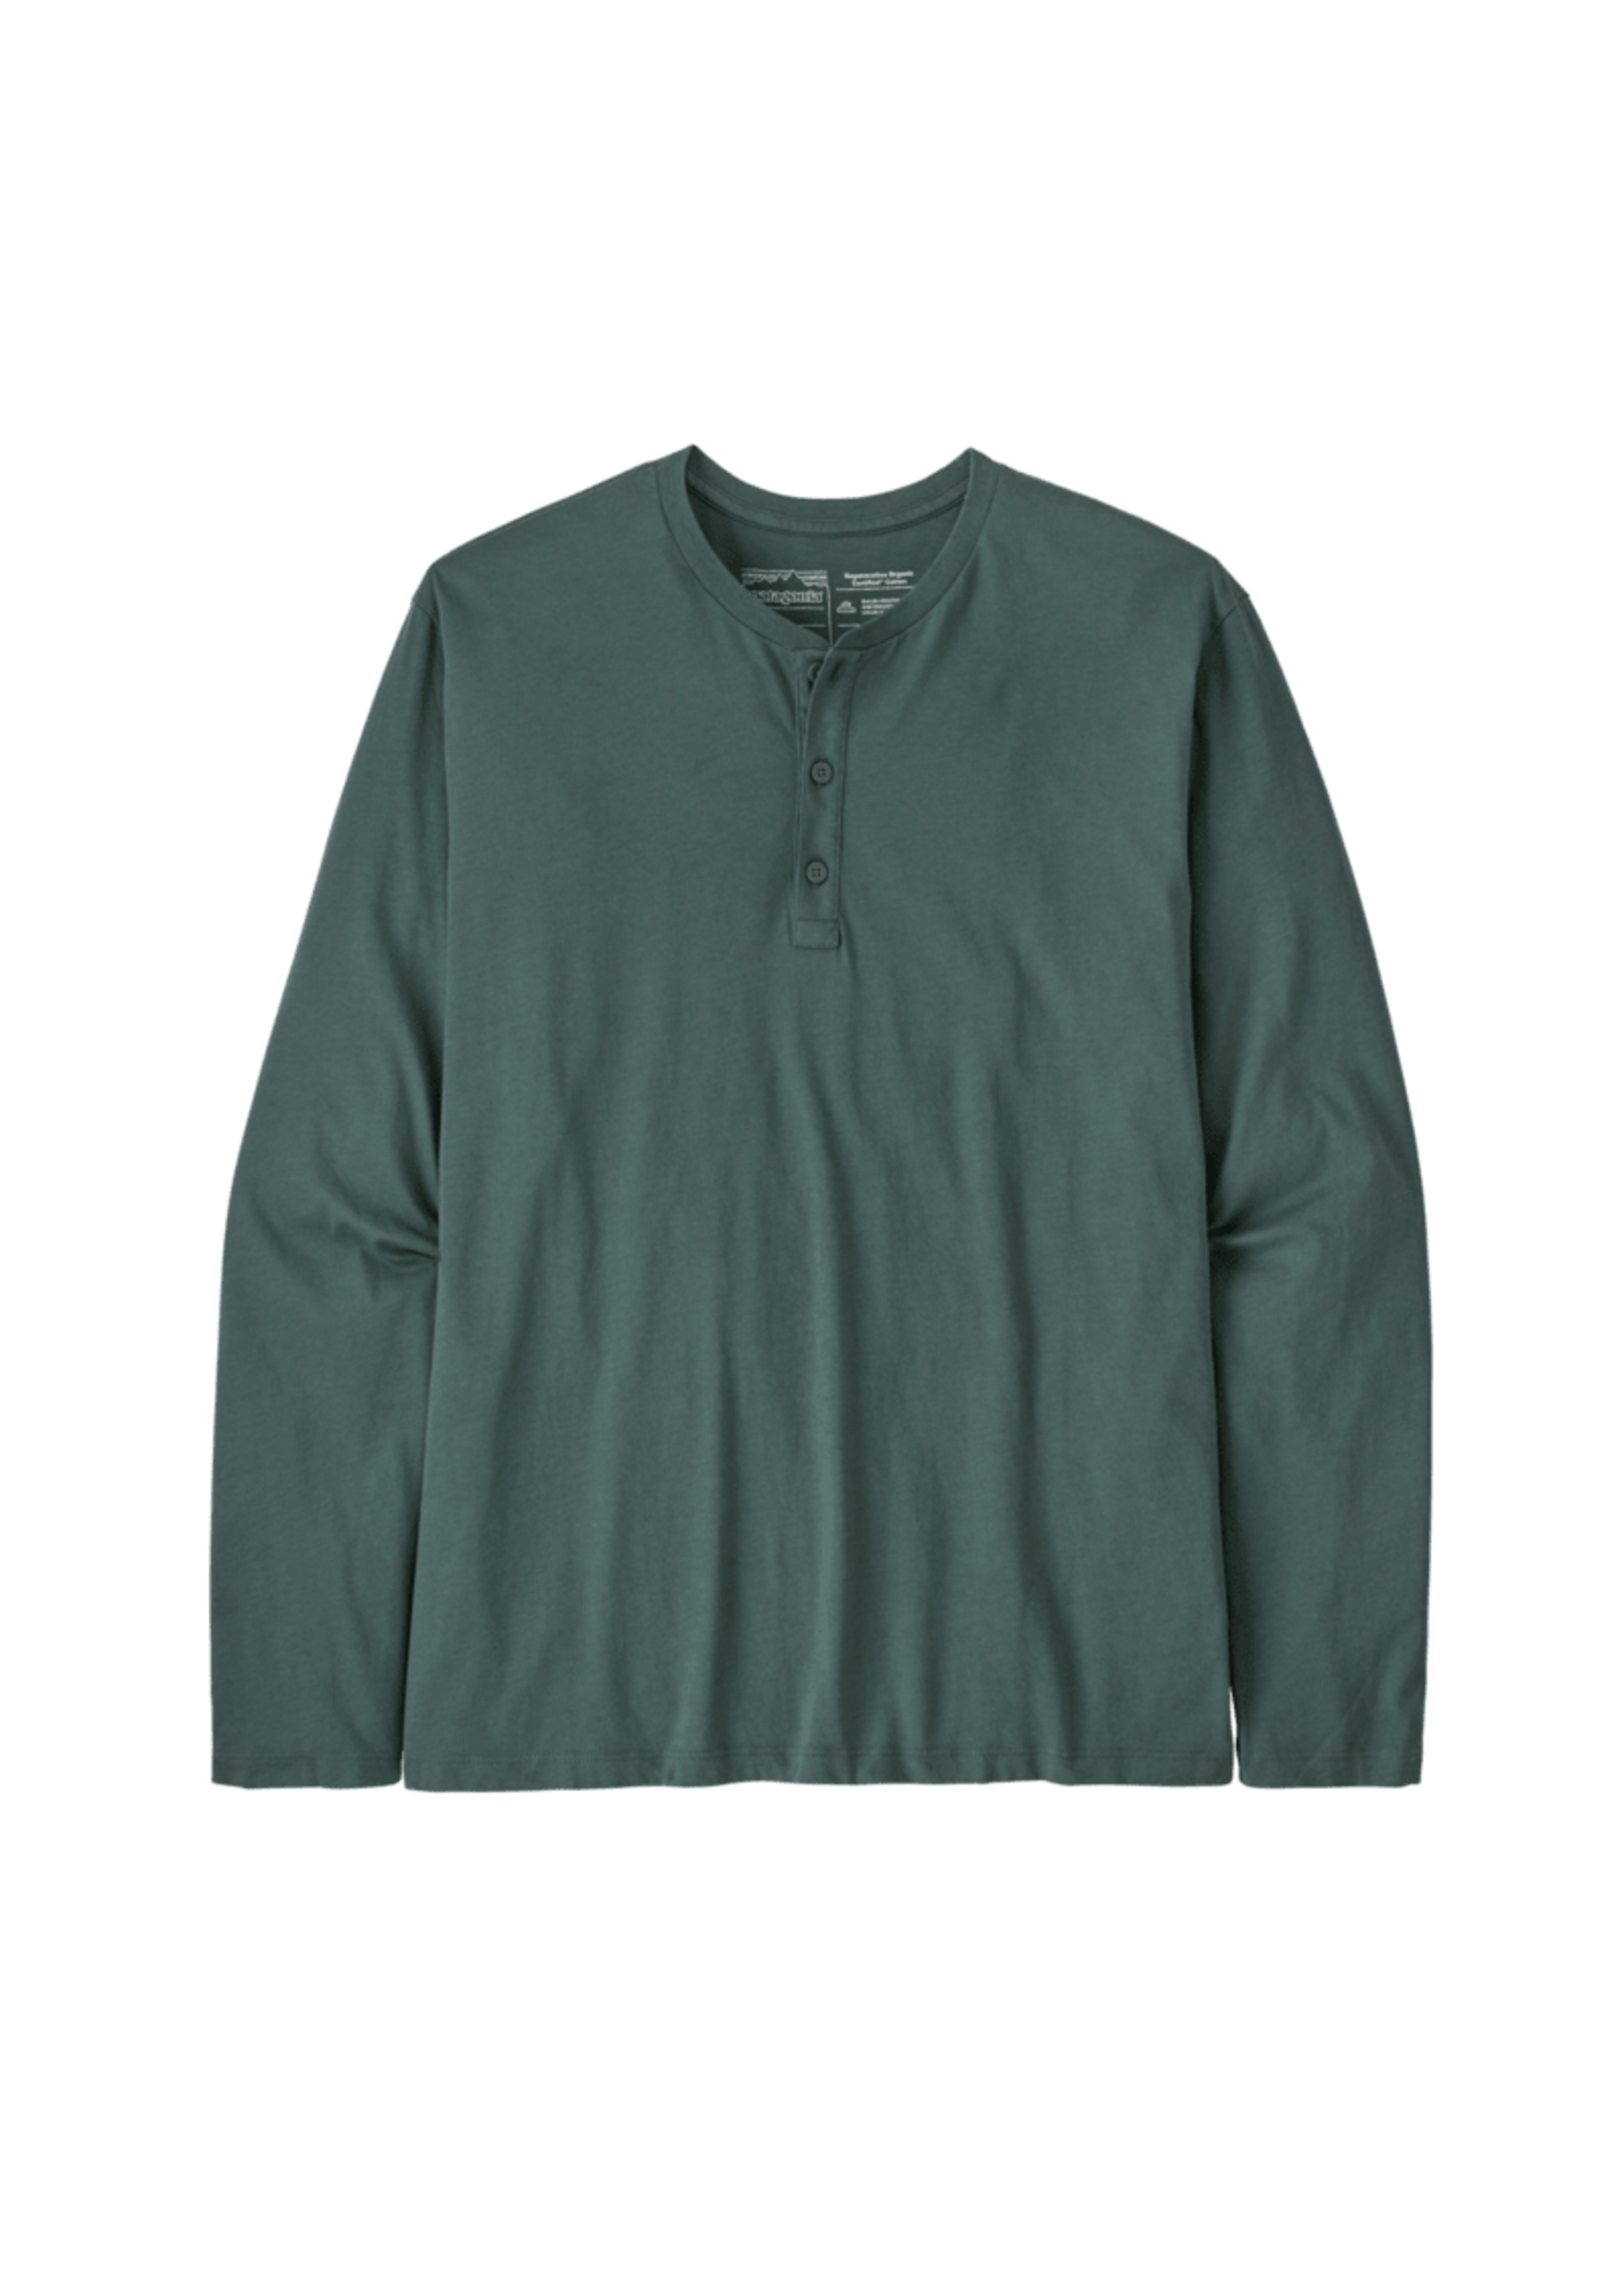 Patagonia Men's Long Sleeve Daily Henley - Nouveau Green